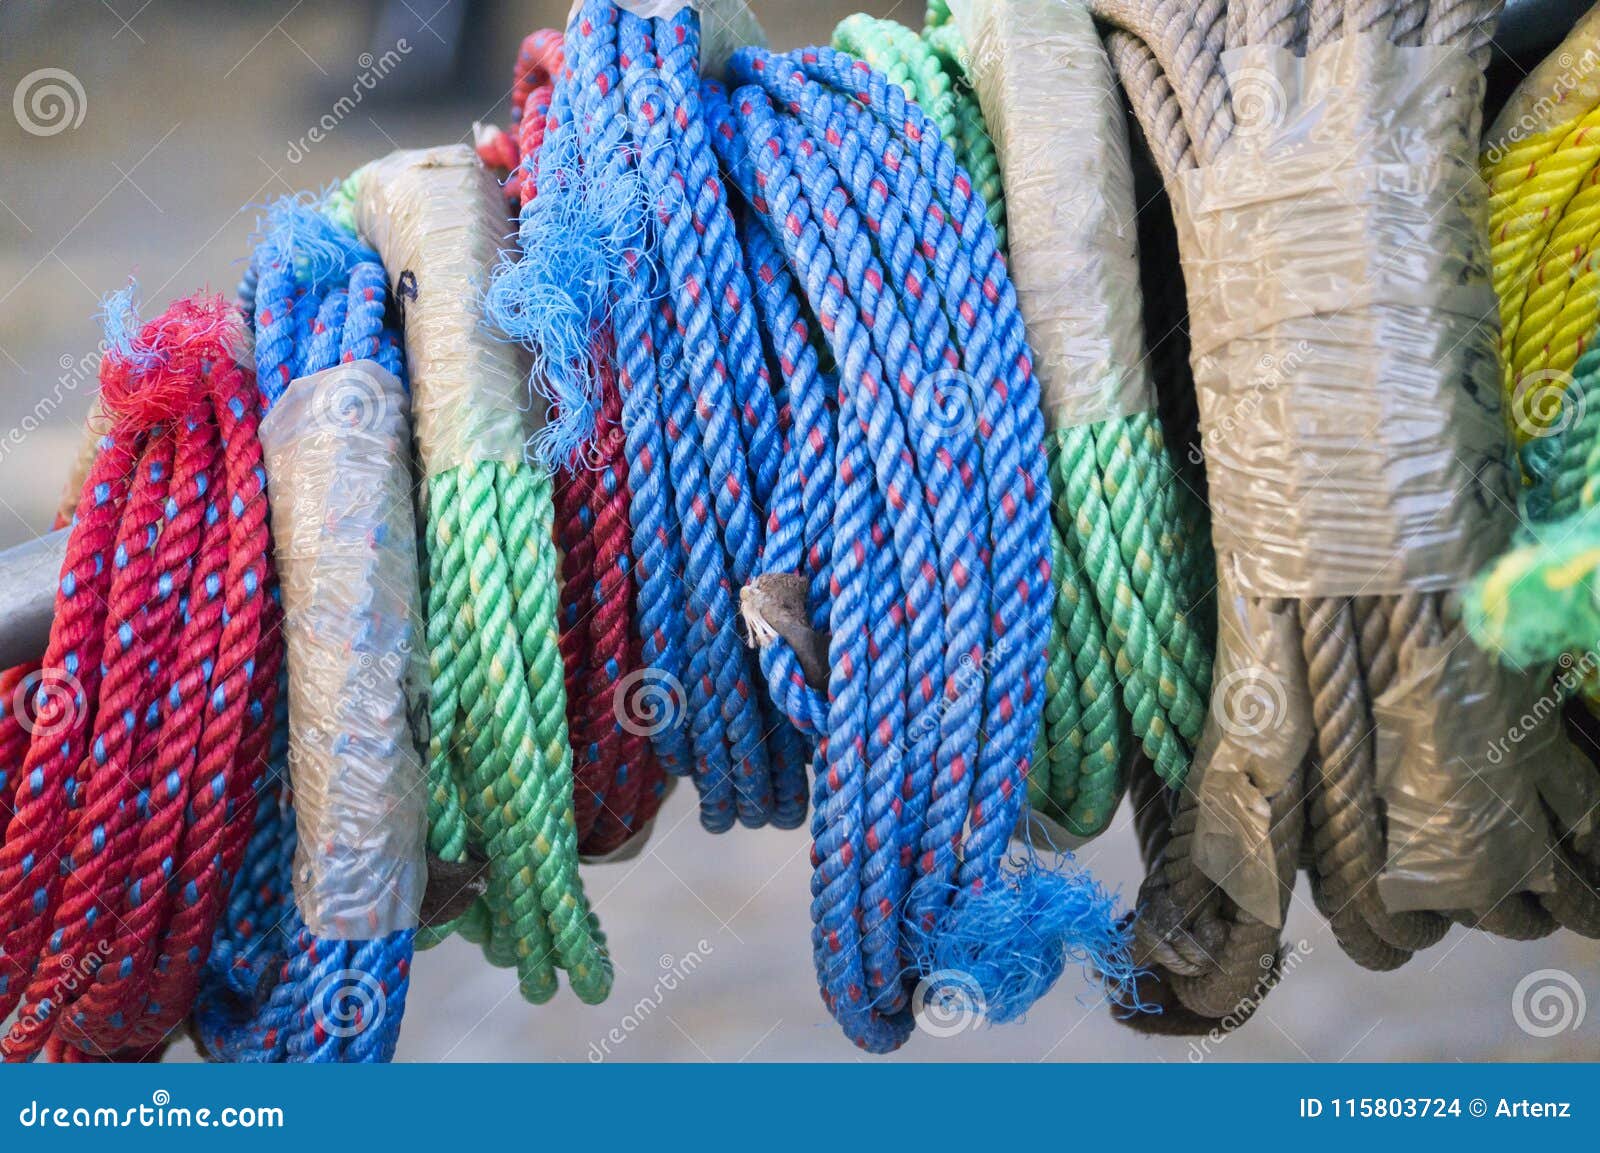 muliple colors of polypropylene ropes